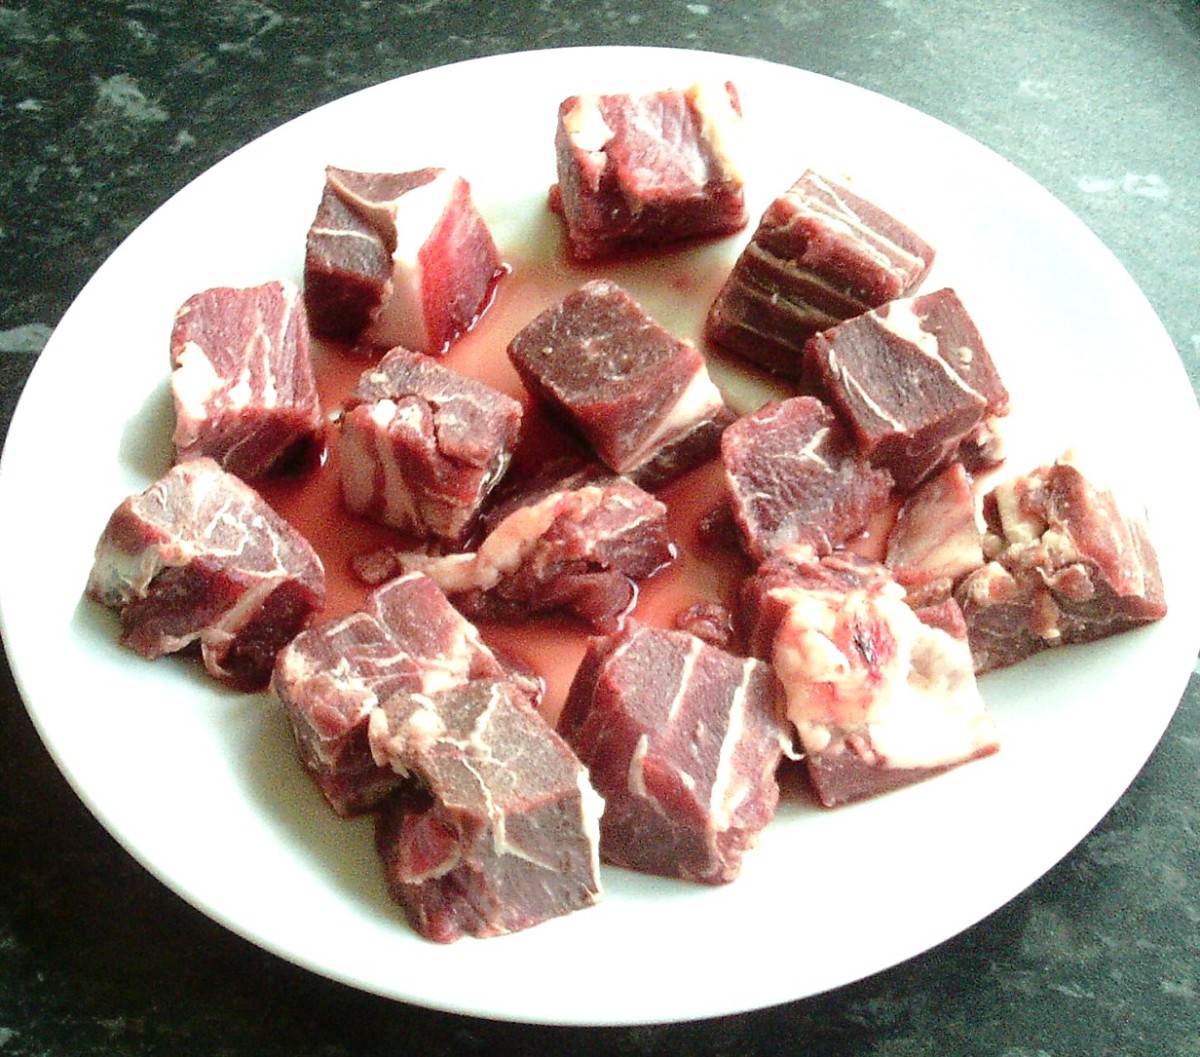 Diced goat meat